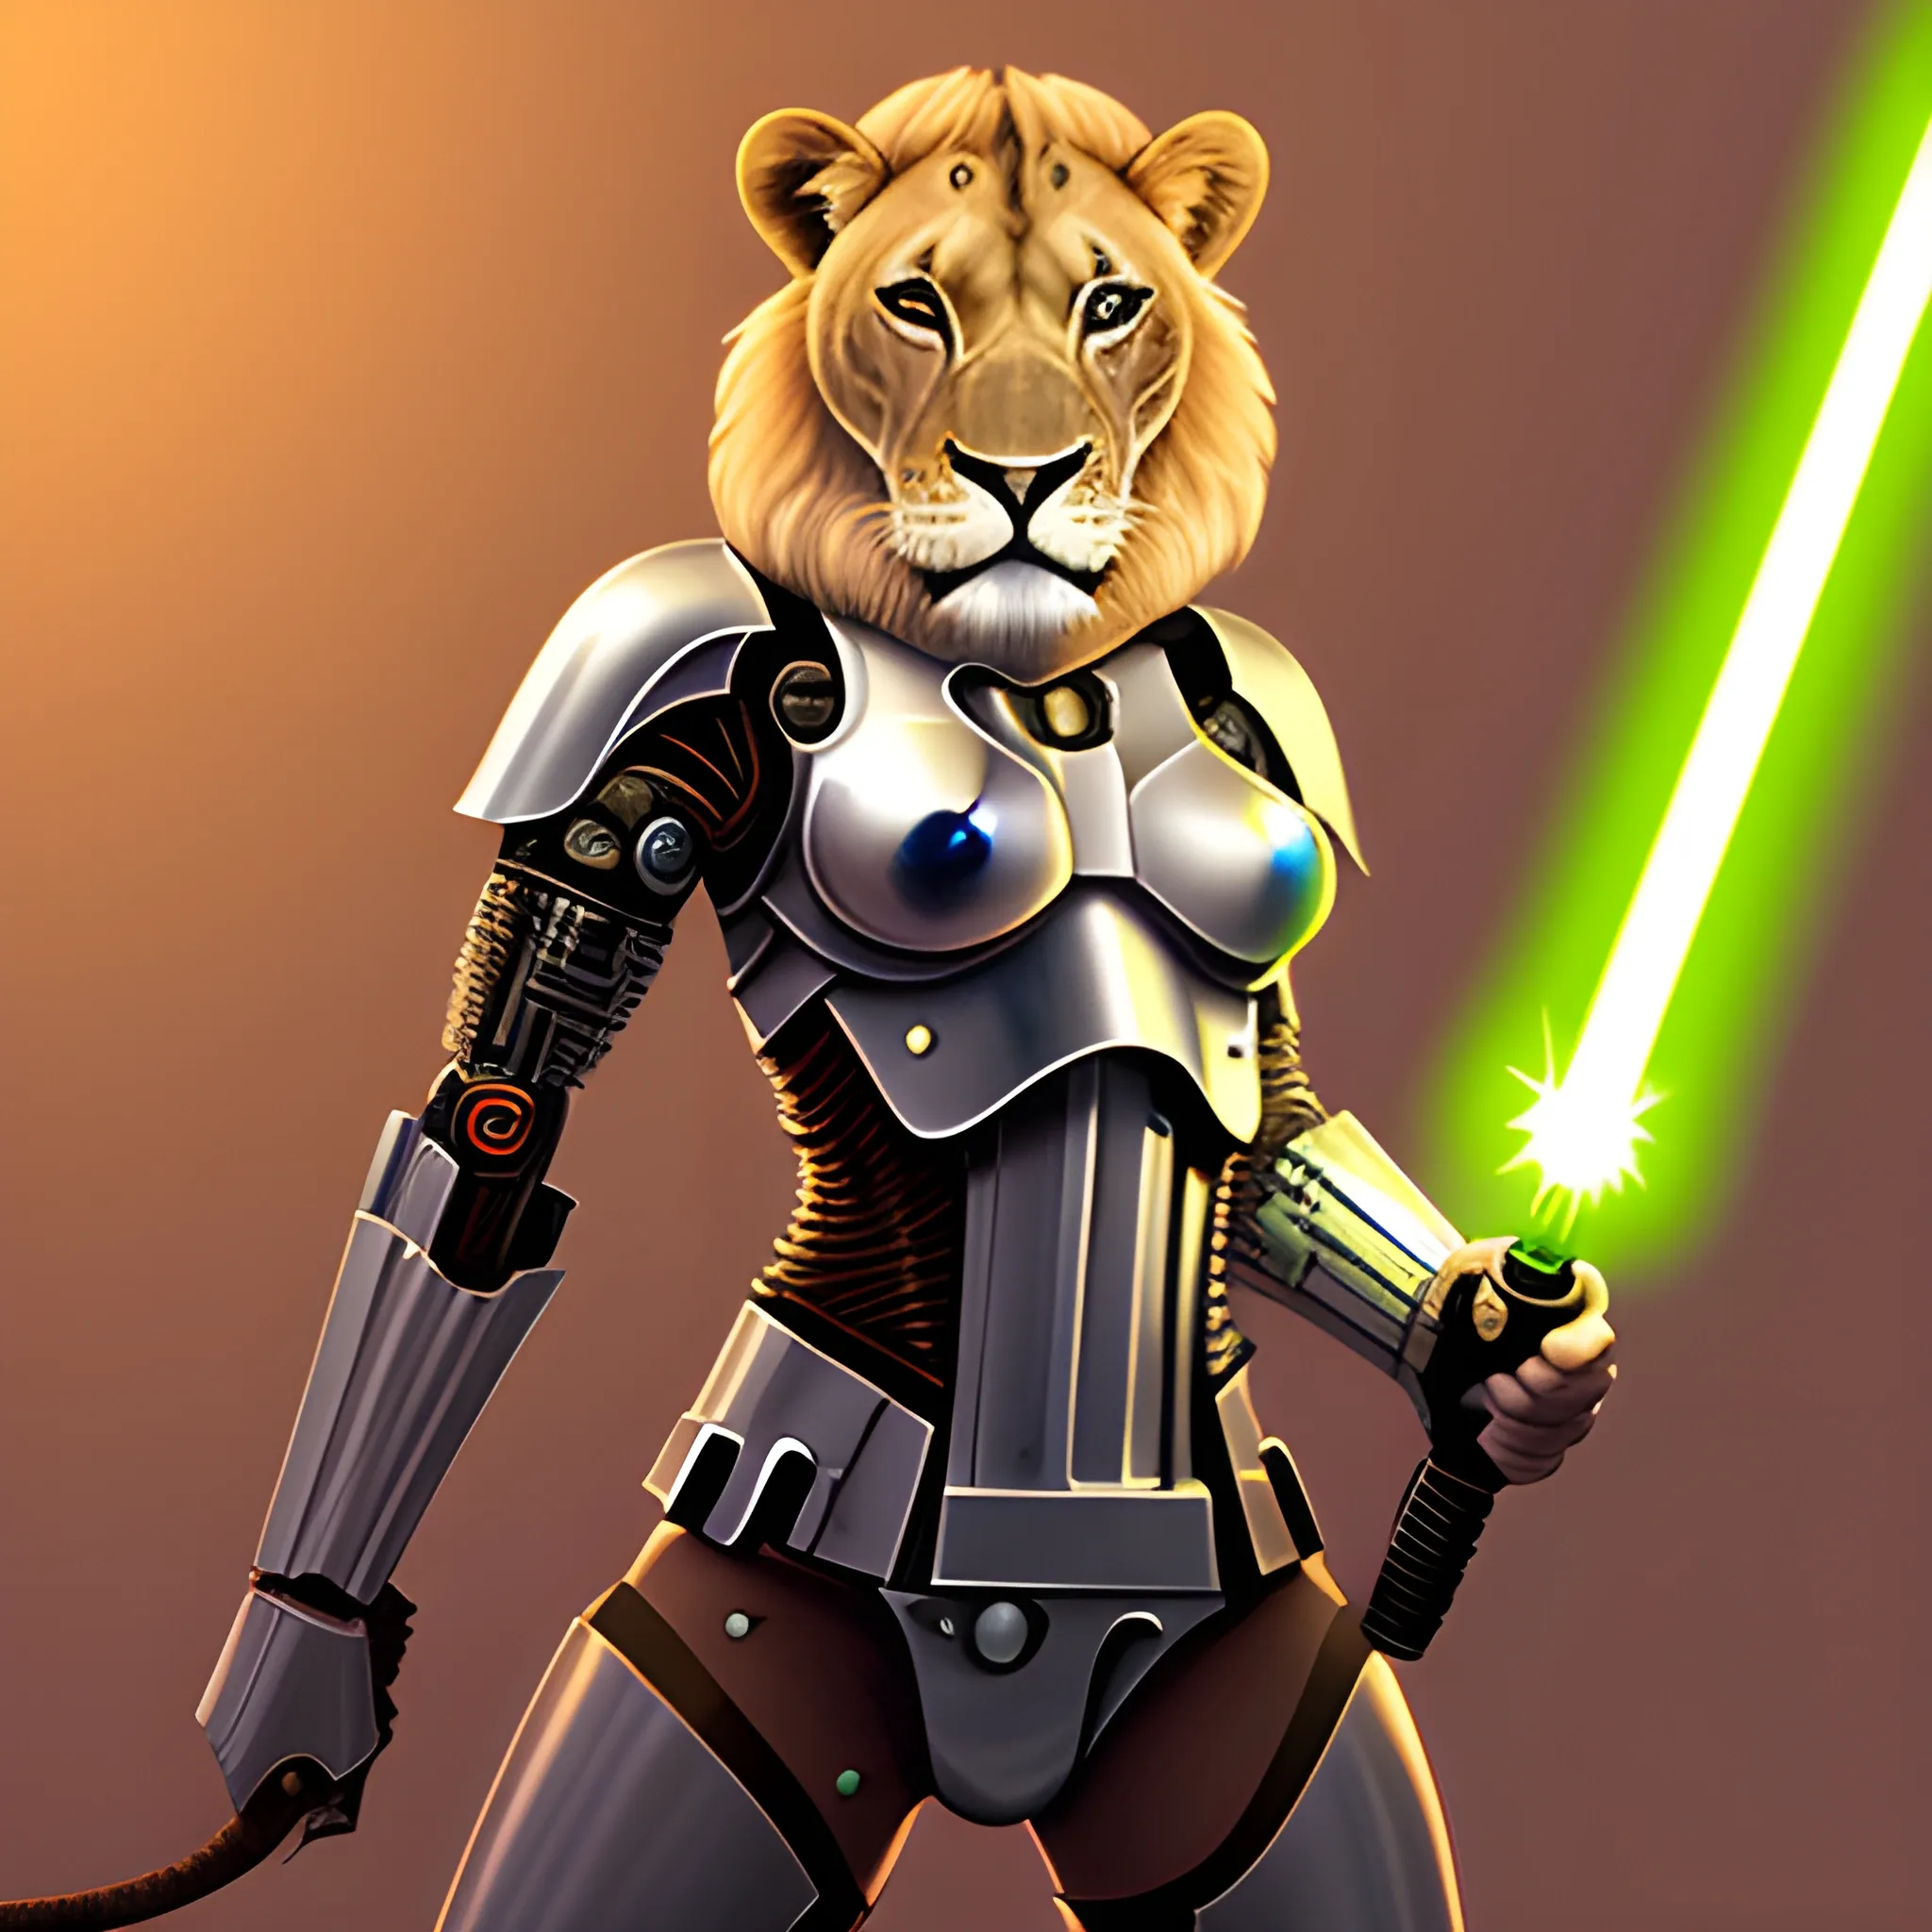 cyborg anthro lioness knight holding a lightsaber
